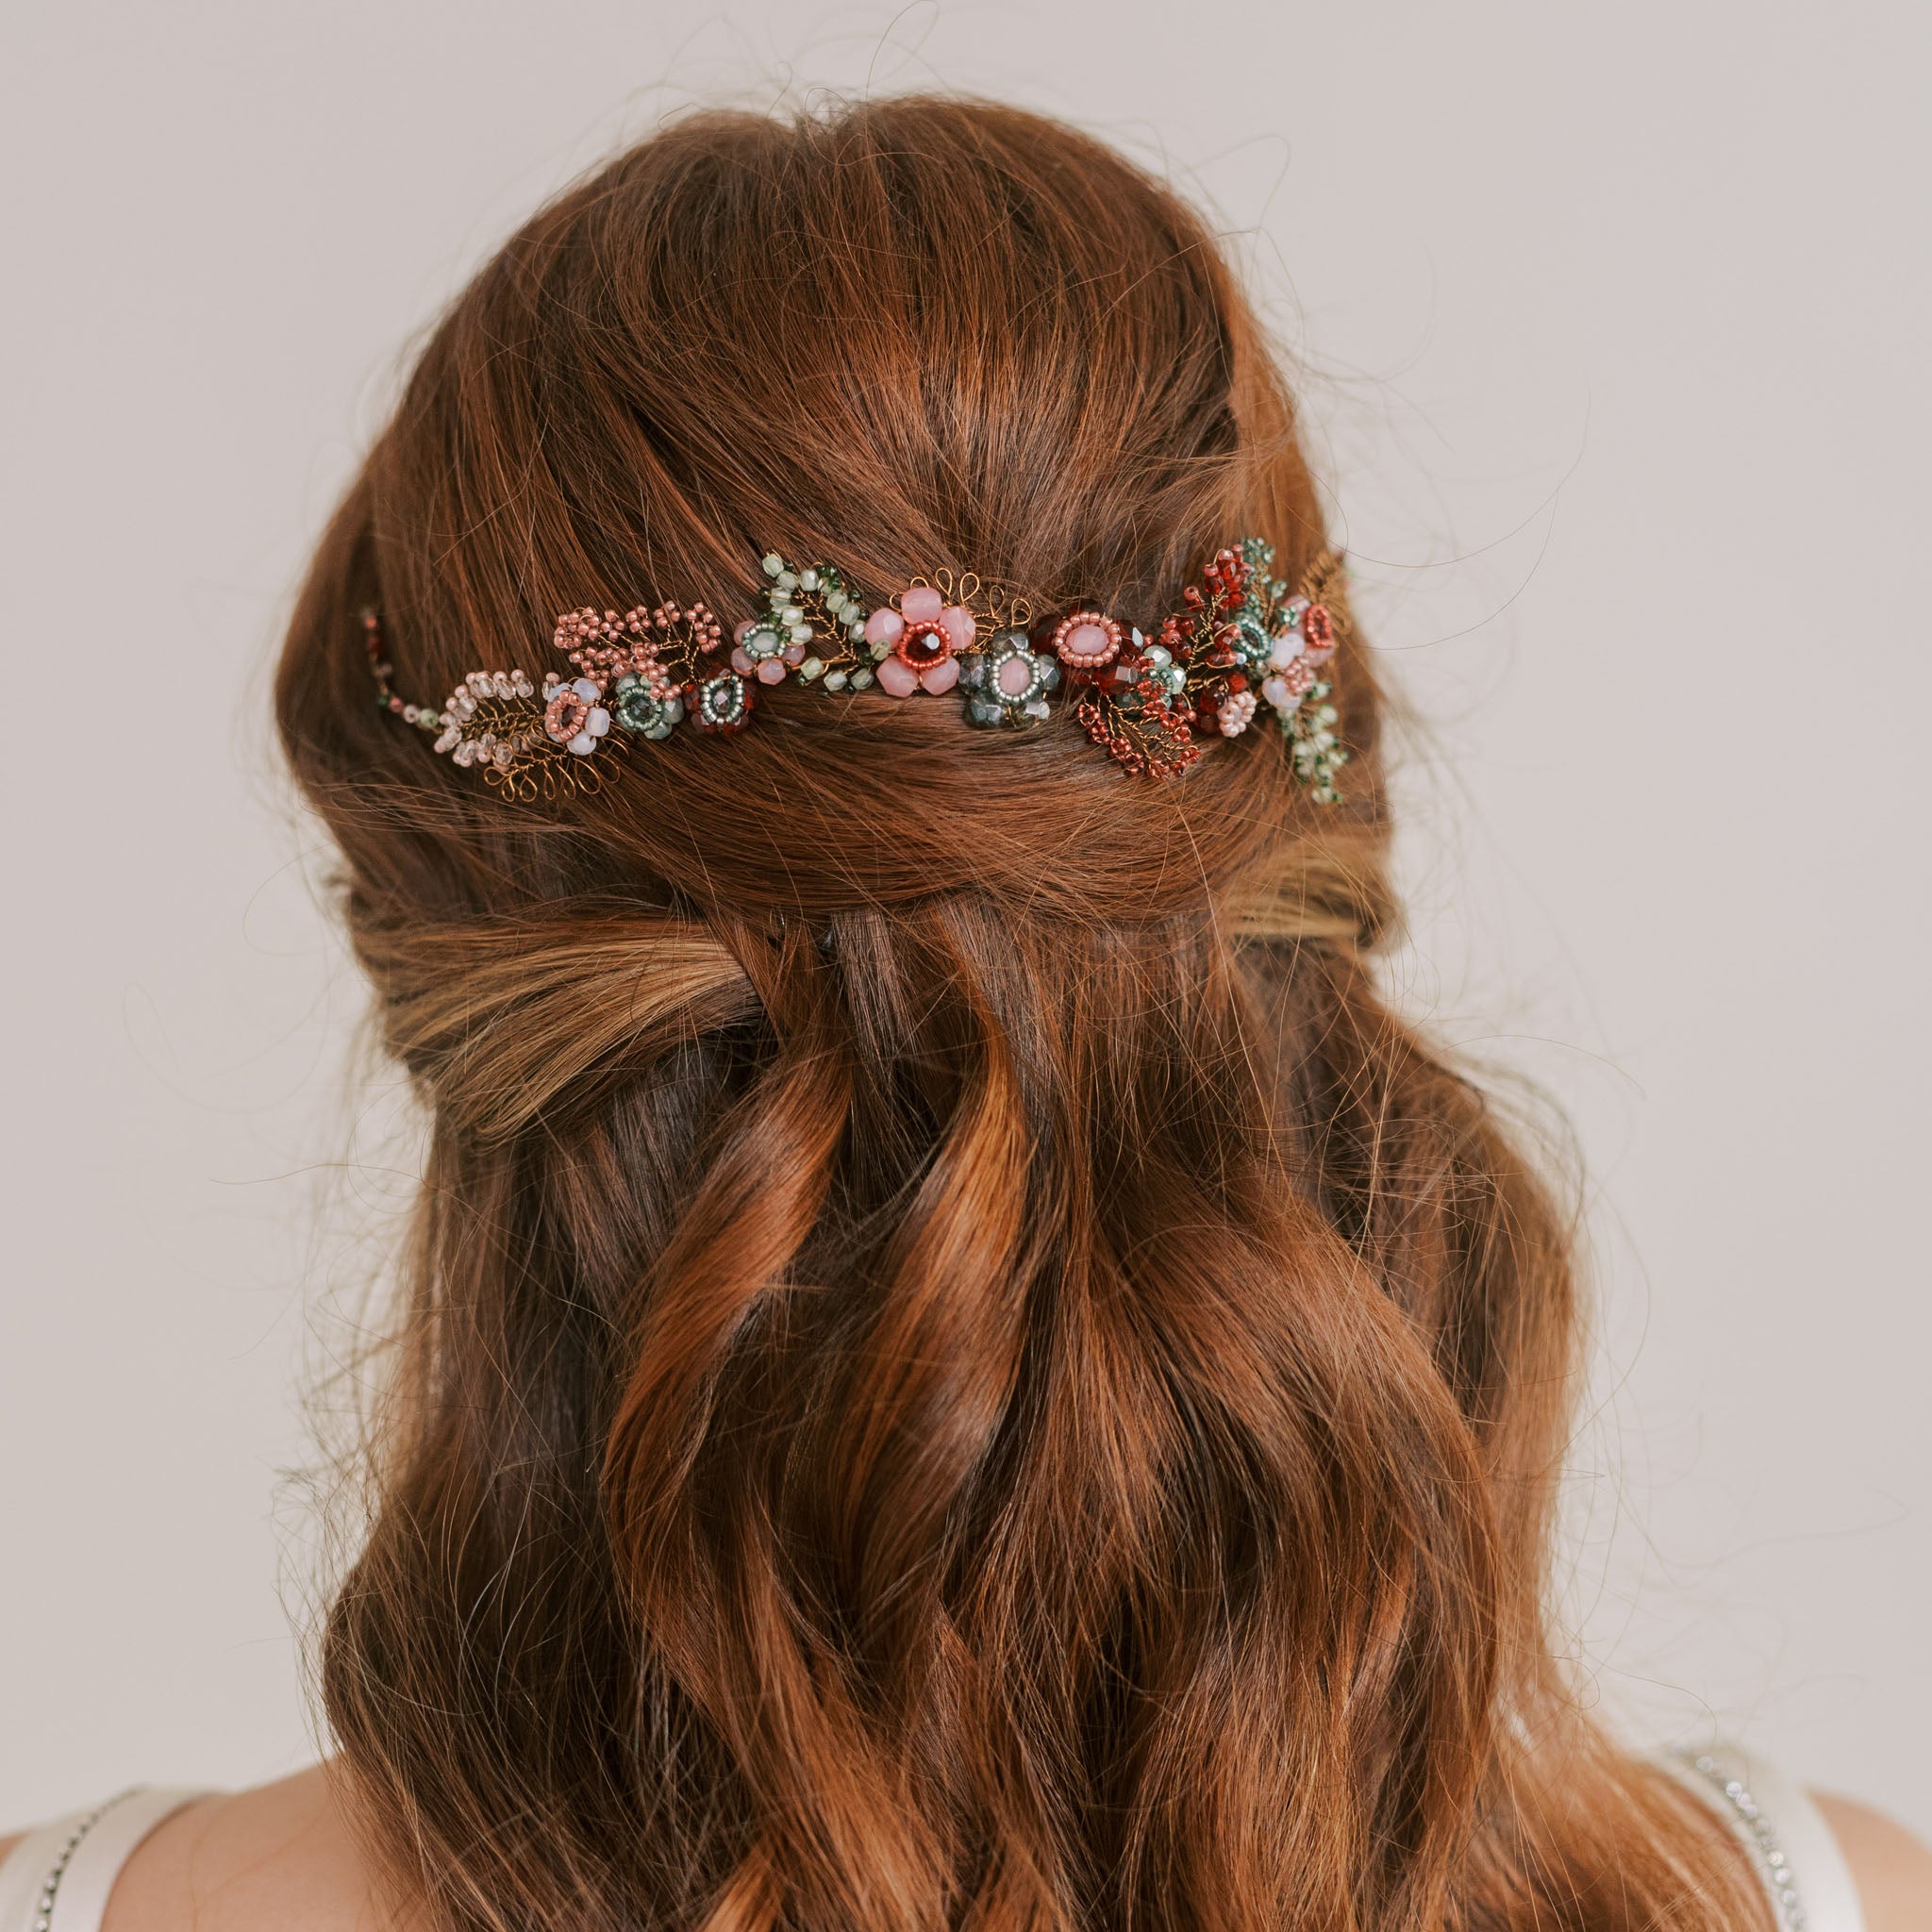 handmade nature inspired wedding hairvine in pink, red and green by Judith Brown Bridal